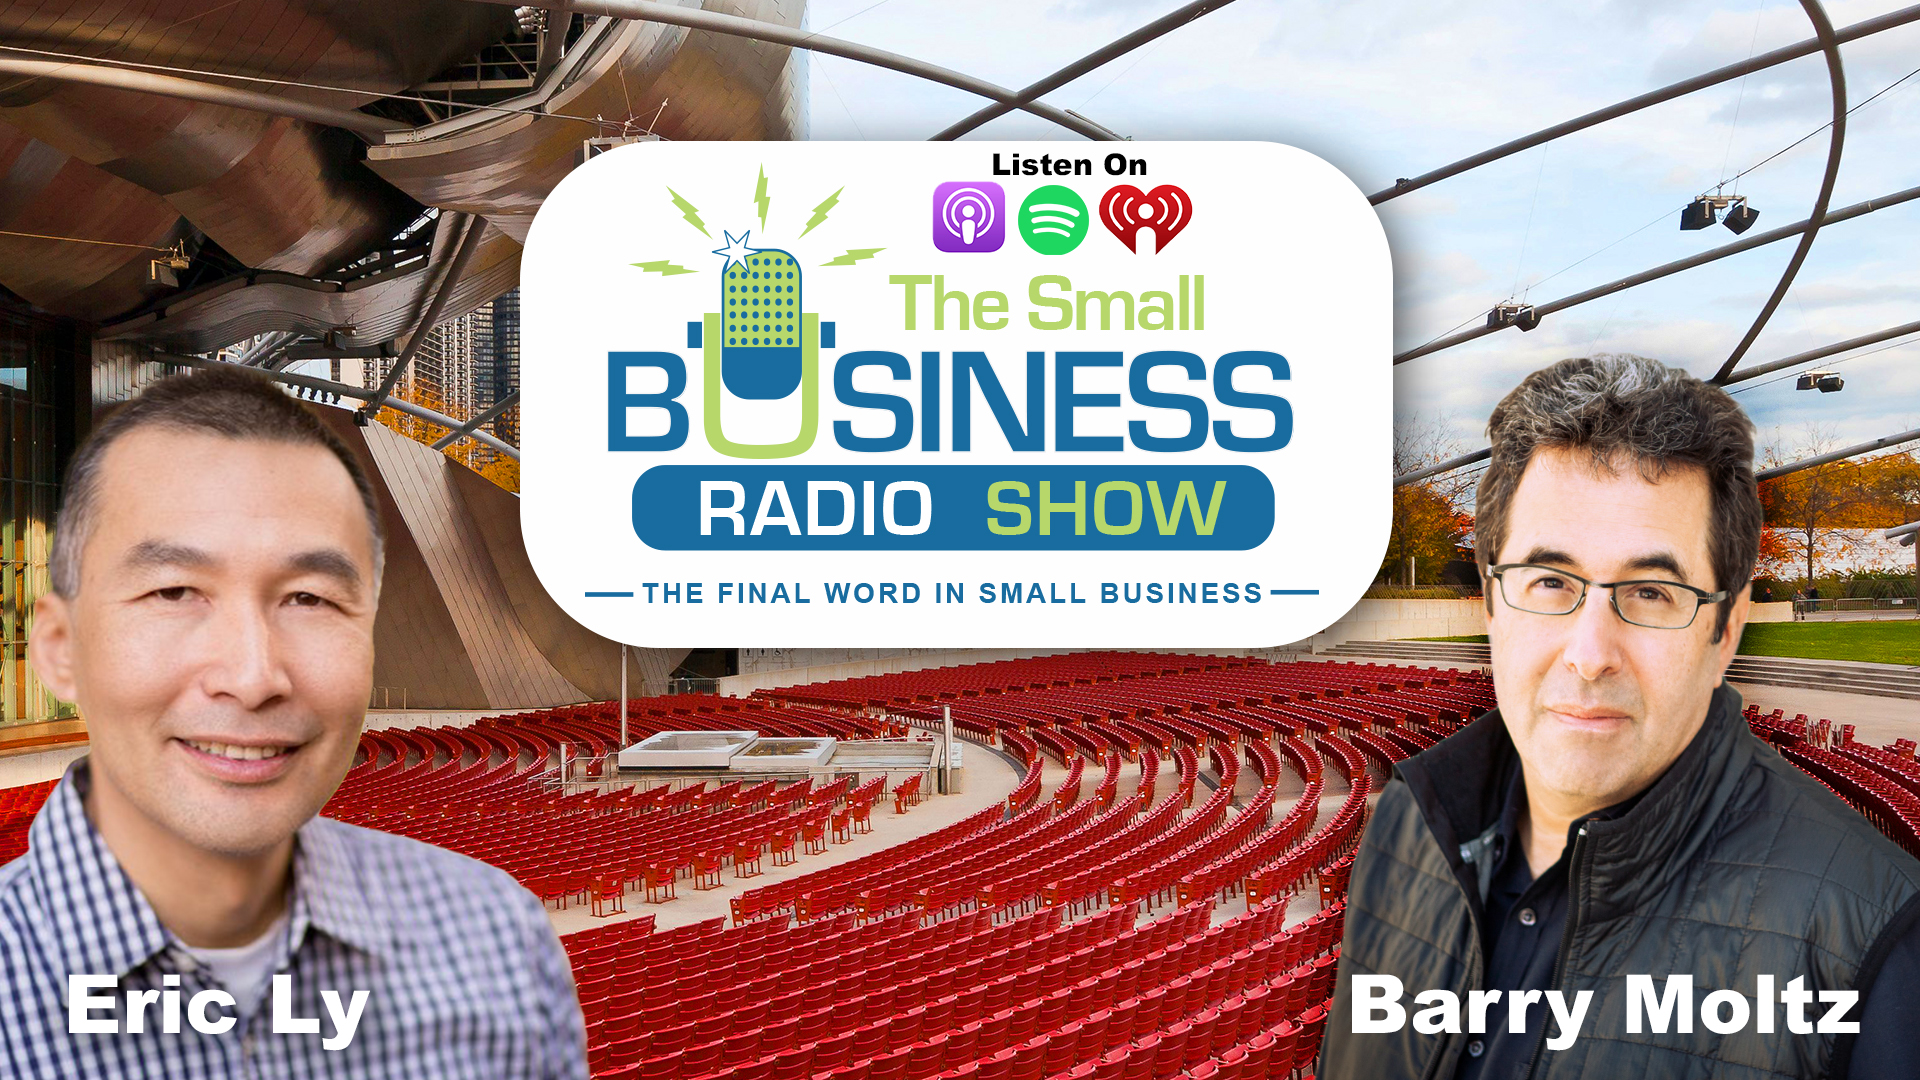 Eric Ly on The Small Business Radio Show